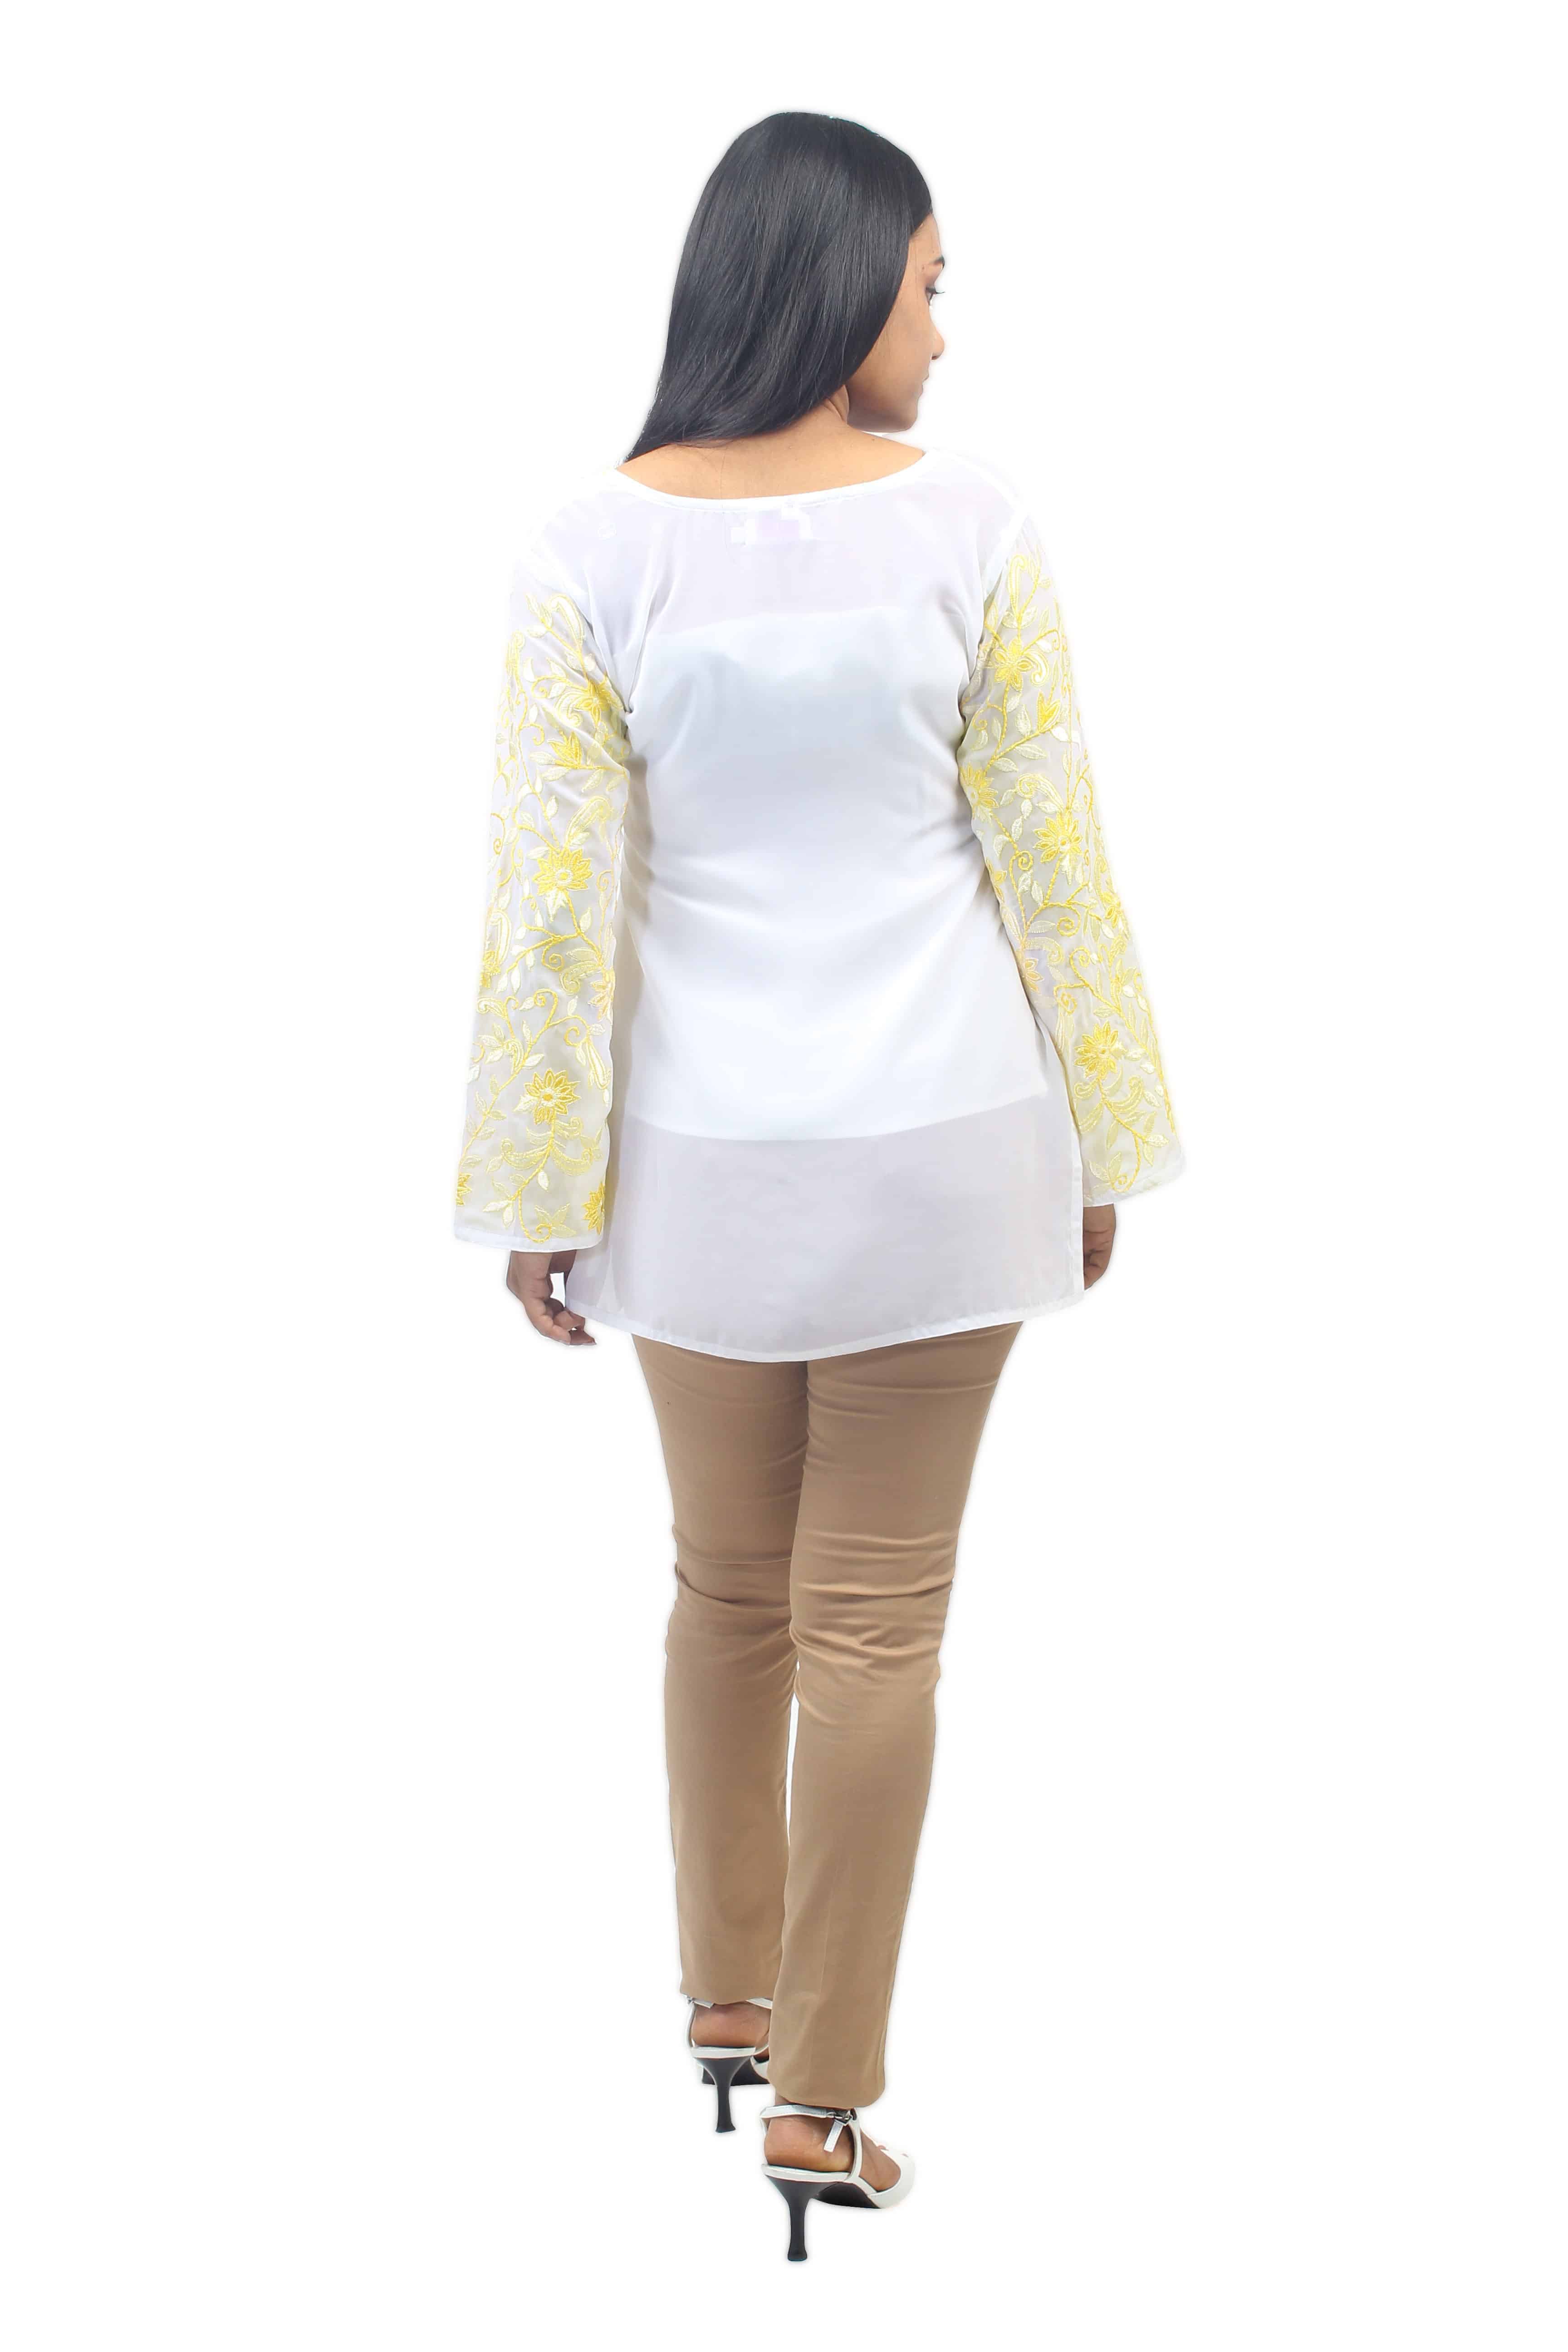 White Short Tunic Top with Yellow & Cream Floral Embroidery at Sleeves and Hemline. Sheer Top Inner Not Included-ROK002